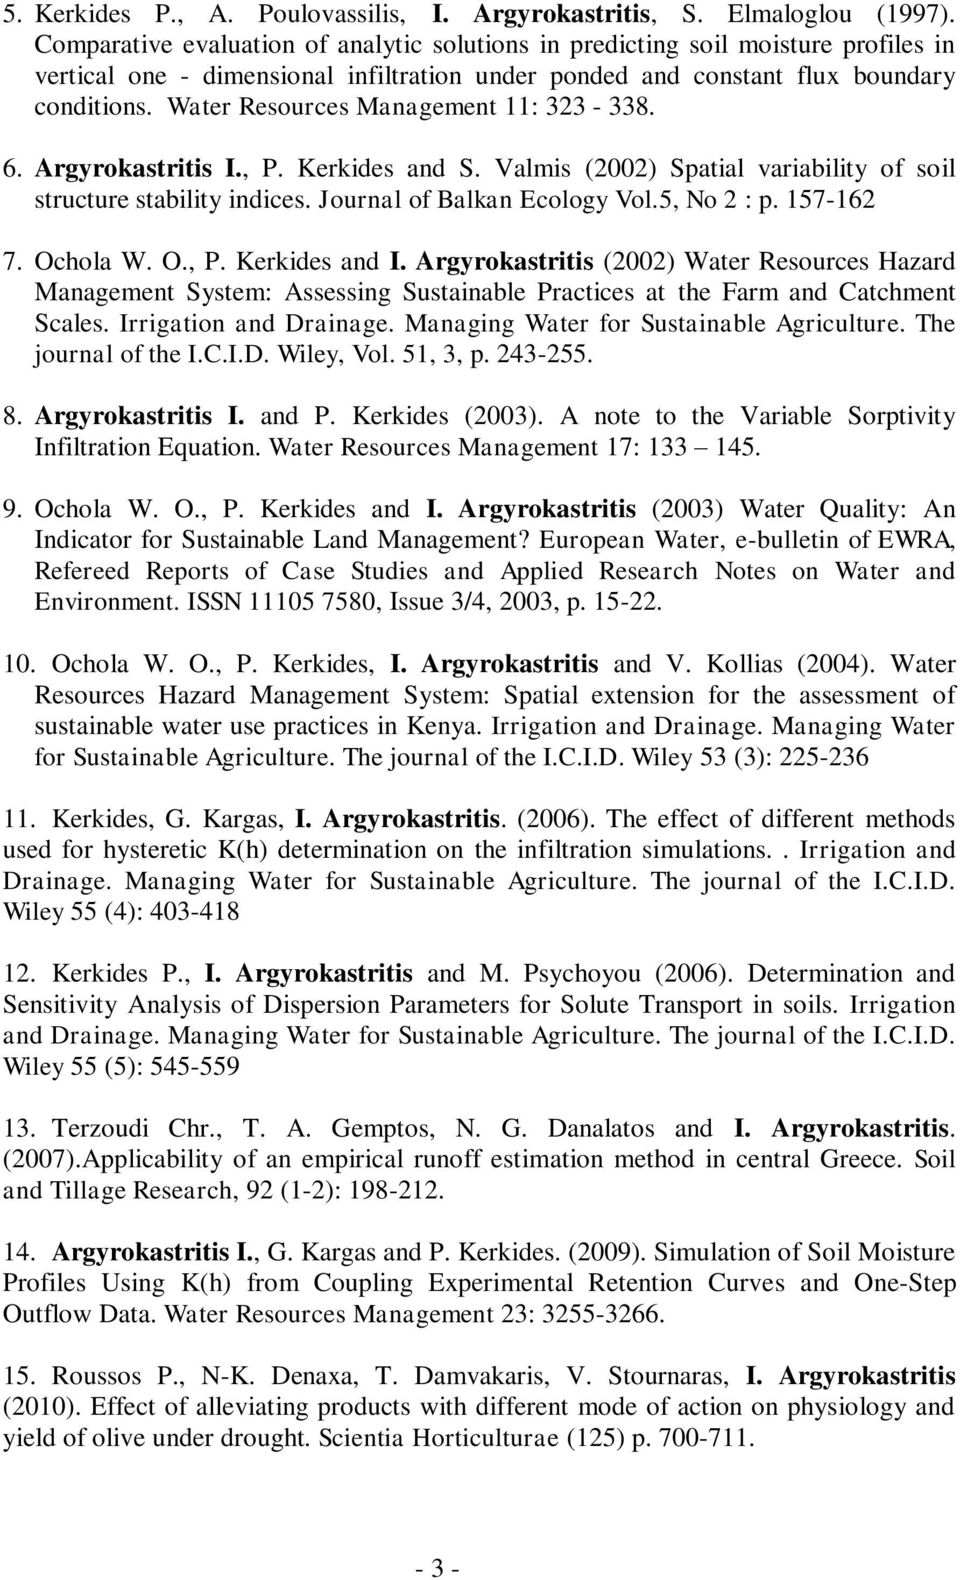 Water Resources Management 11: 323-338. 6. Argyrokastritis I., P. Kerkides and S. Valmis (2002) Spatial variability of soil structure stability indices. Journal of Balkan Ecology Vol.5, No 2 : p.